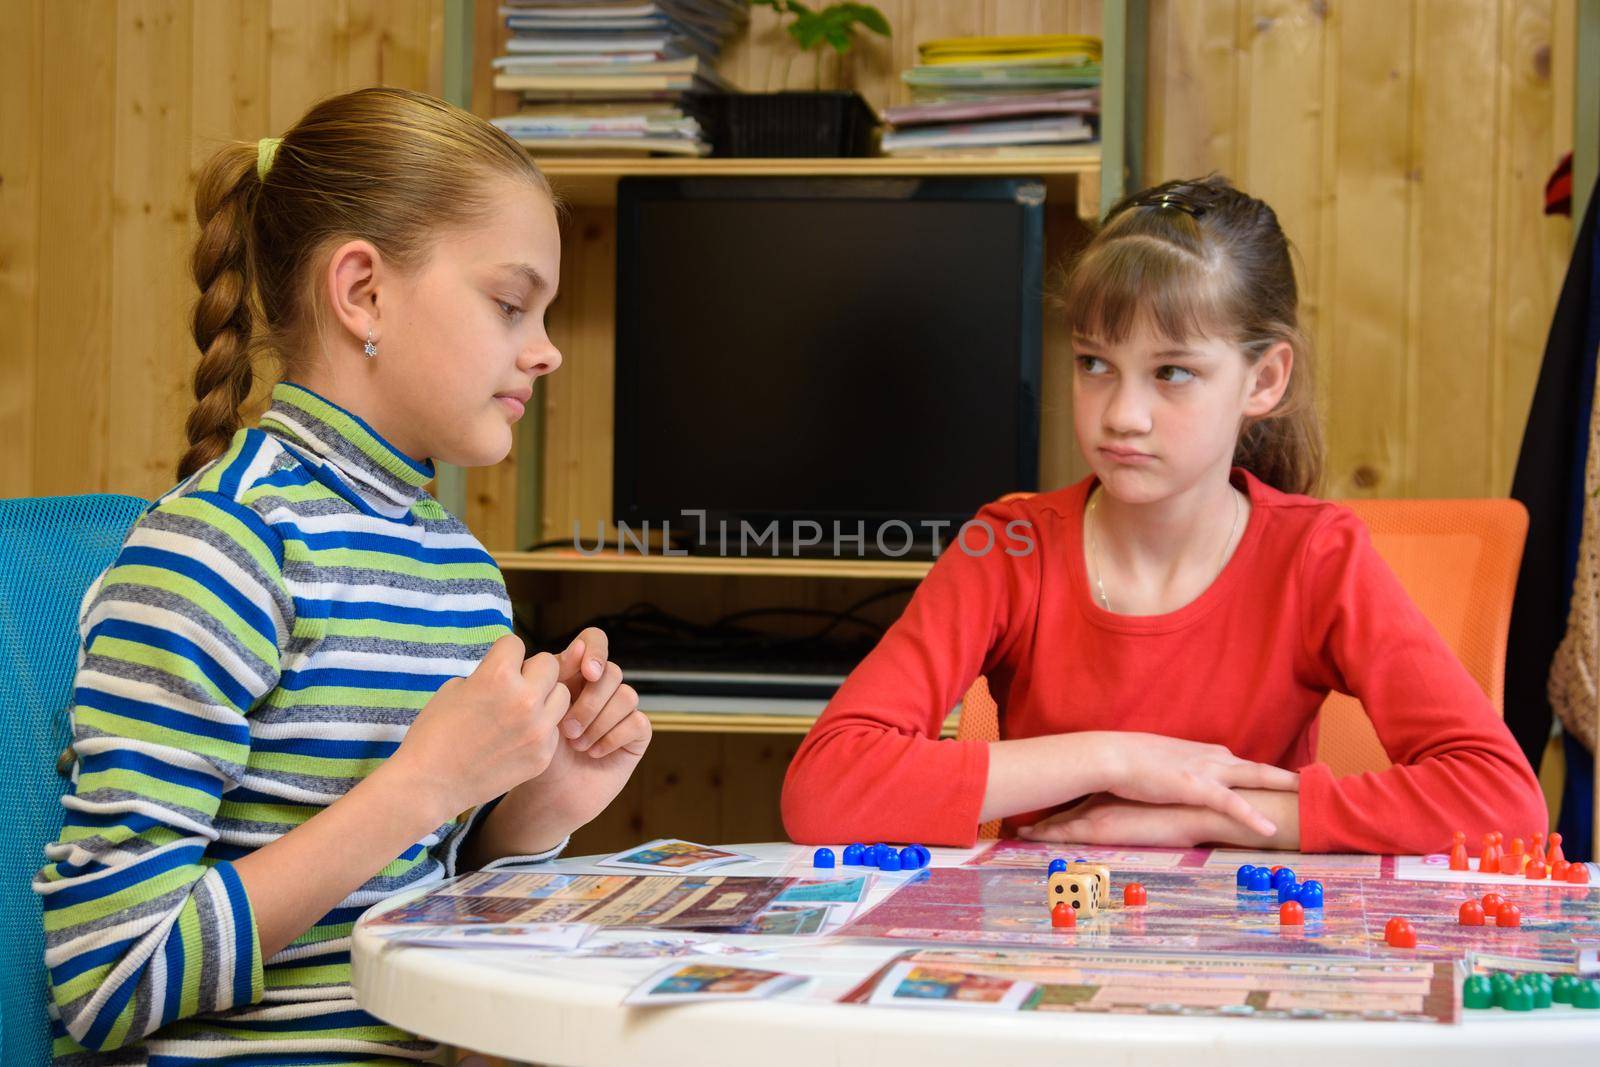 A girl is waiting for another girl to make another move while playing board games